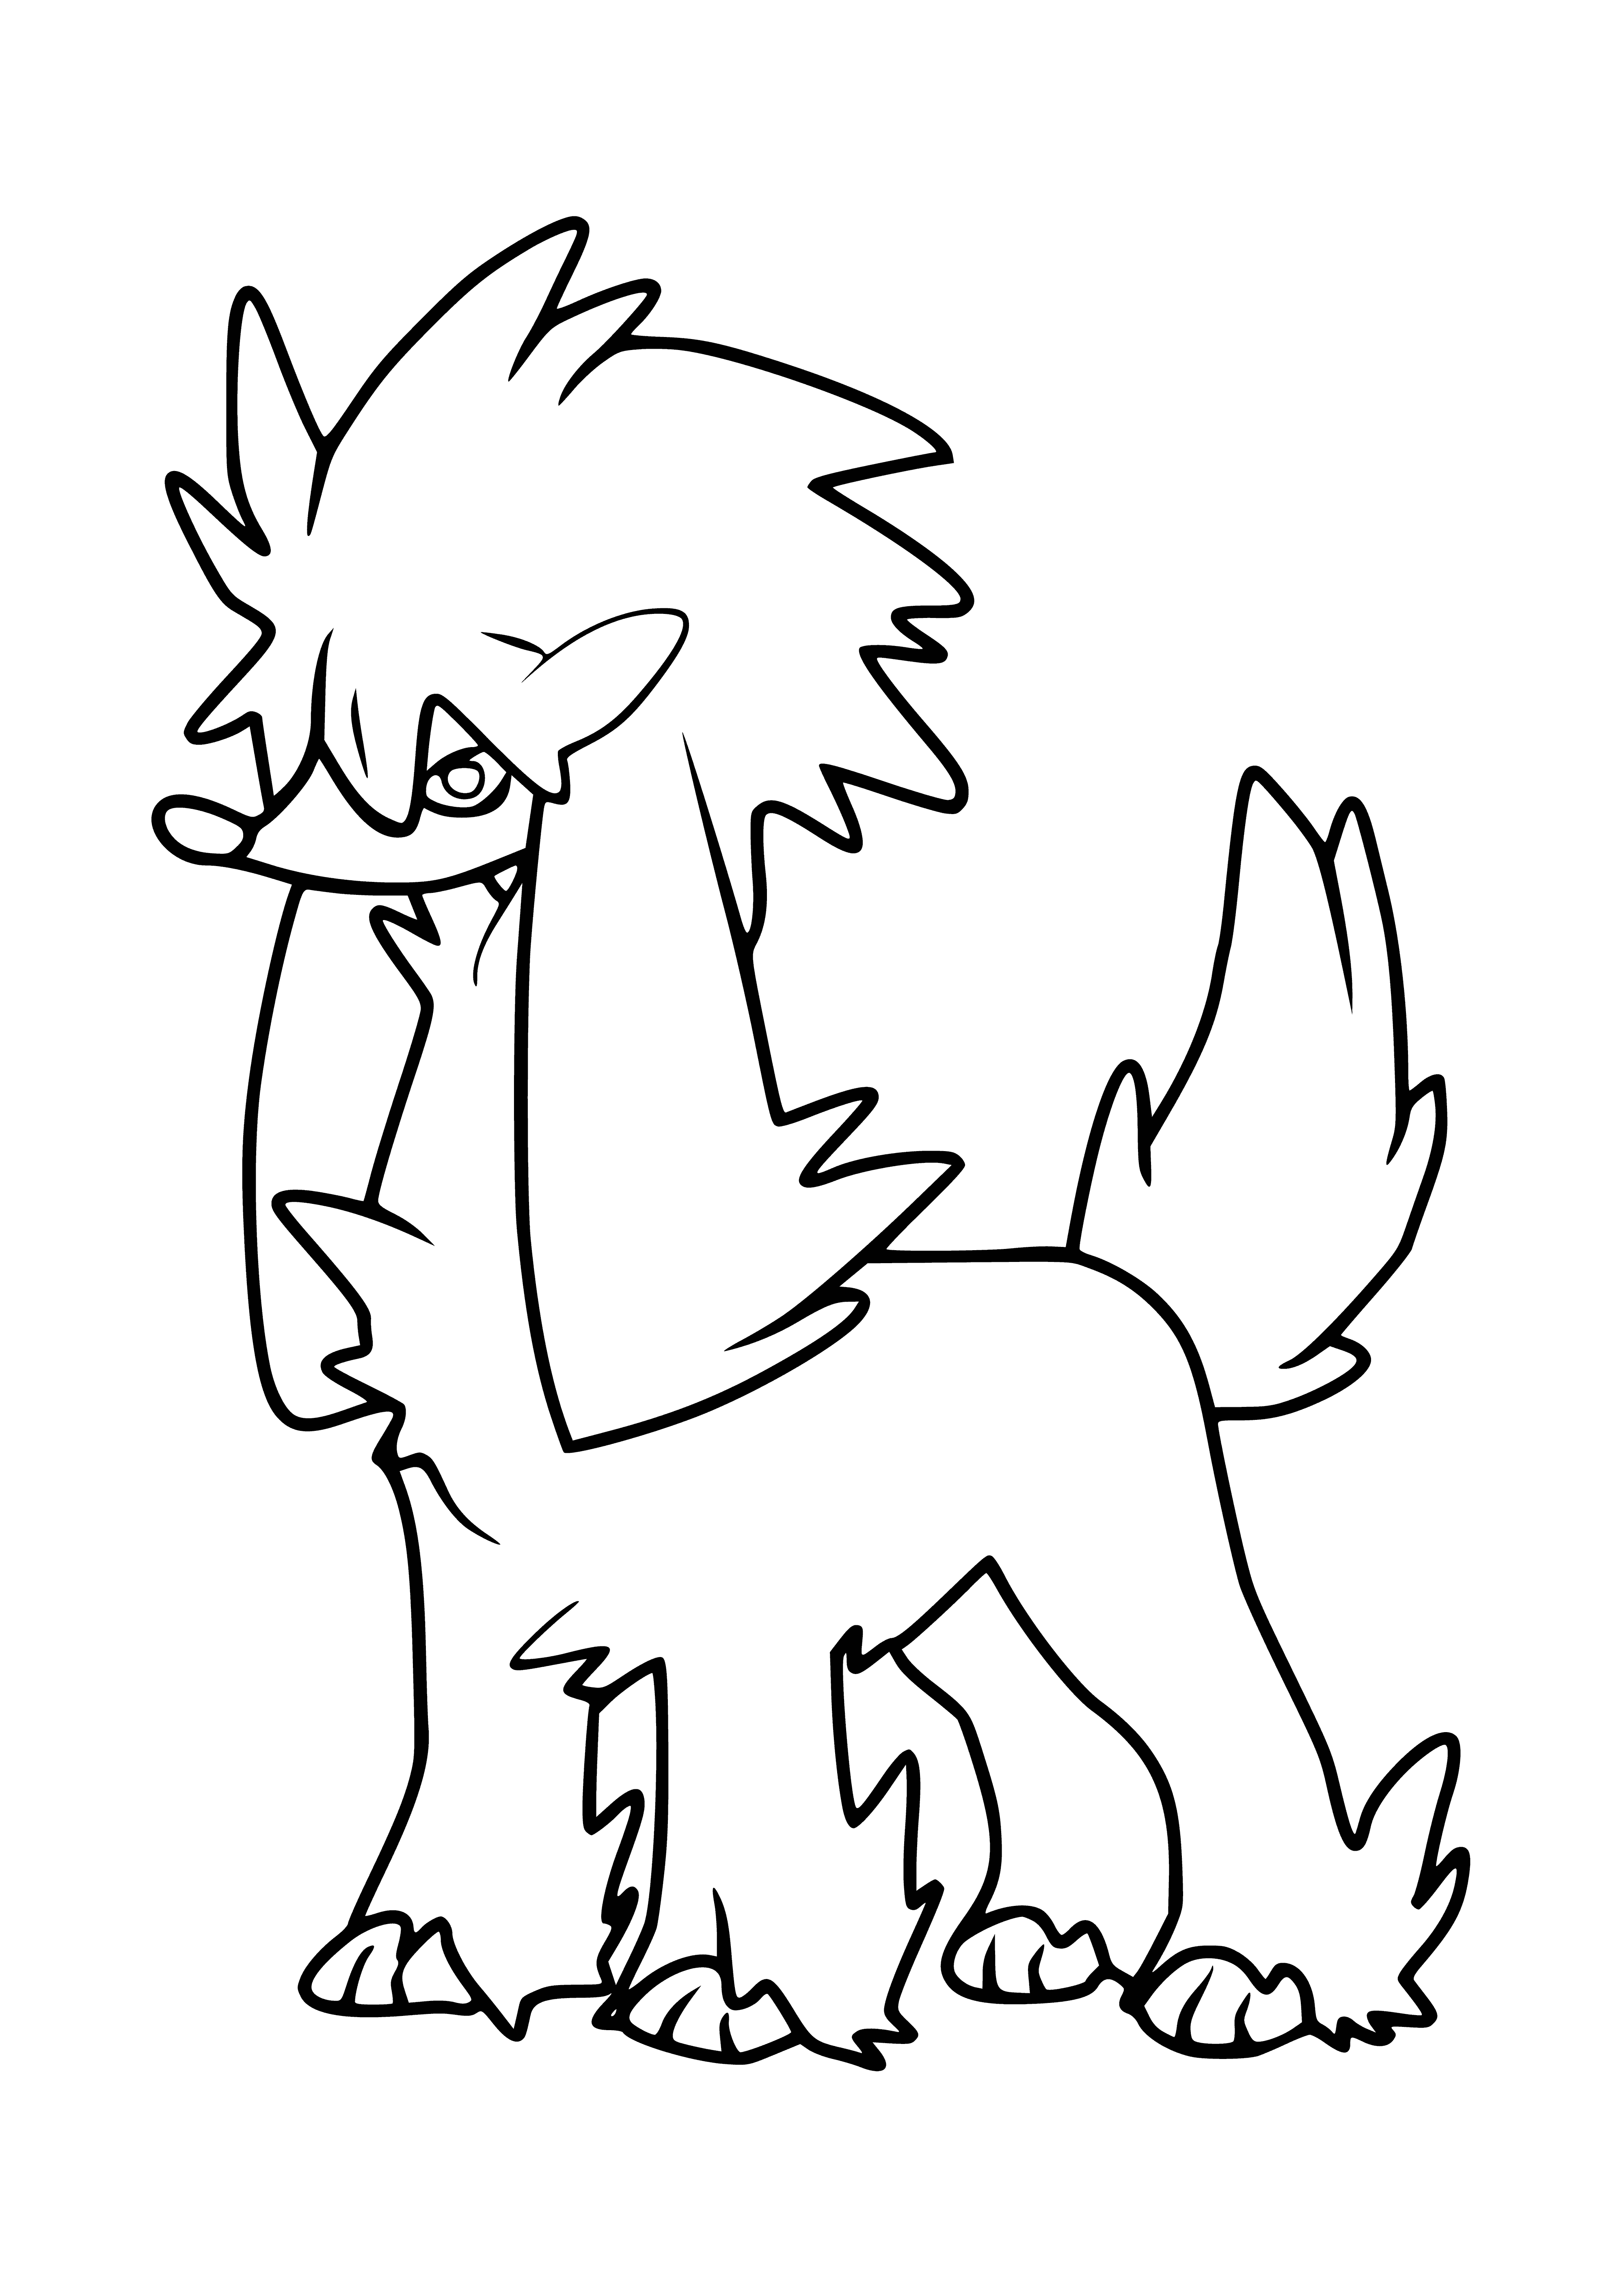 coloring page: Pokemon Furfrou is a bipedal, grey Pokemon with a white chest, tufted head, red eyes, and a white ruff and tail. Black fur, stripes on its legs.